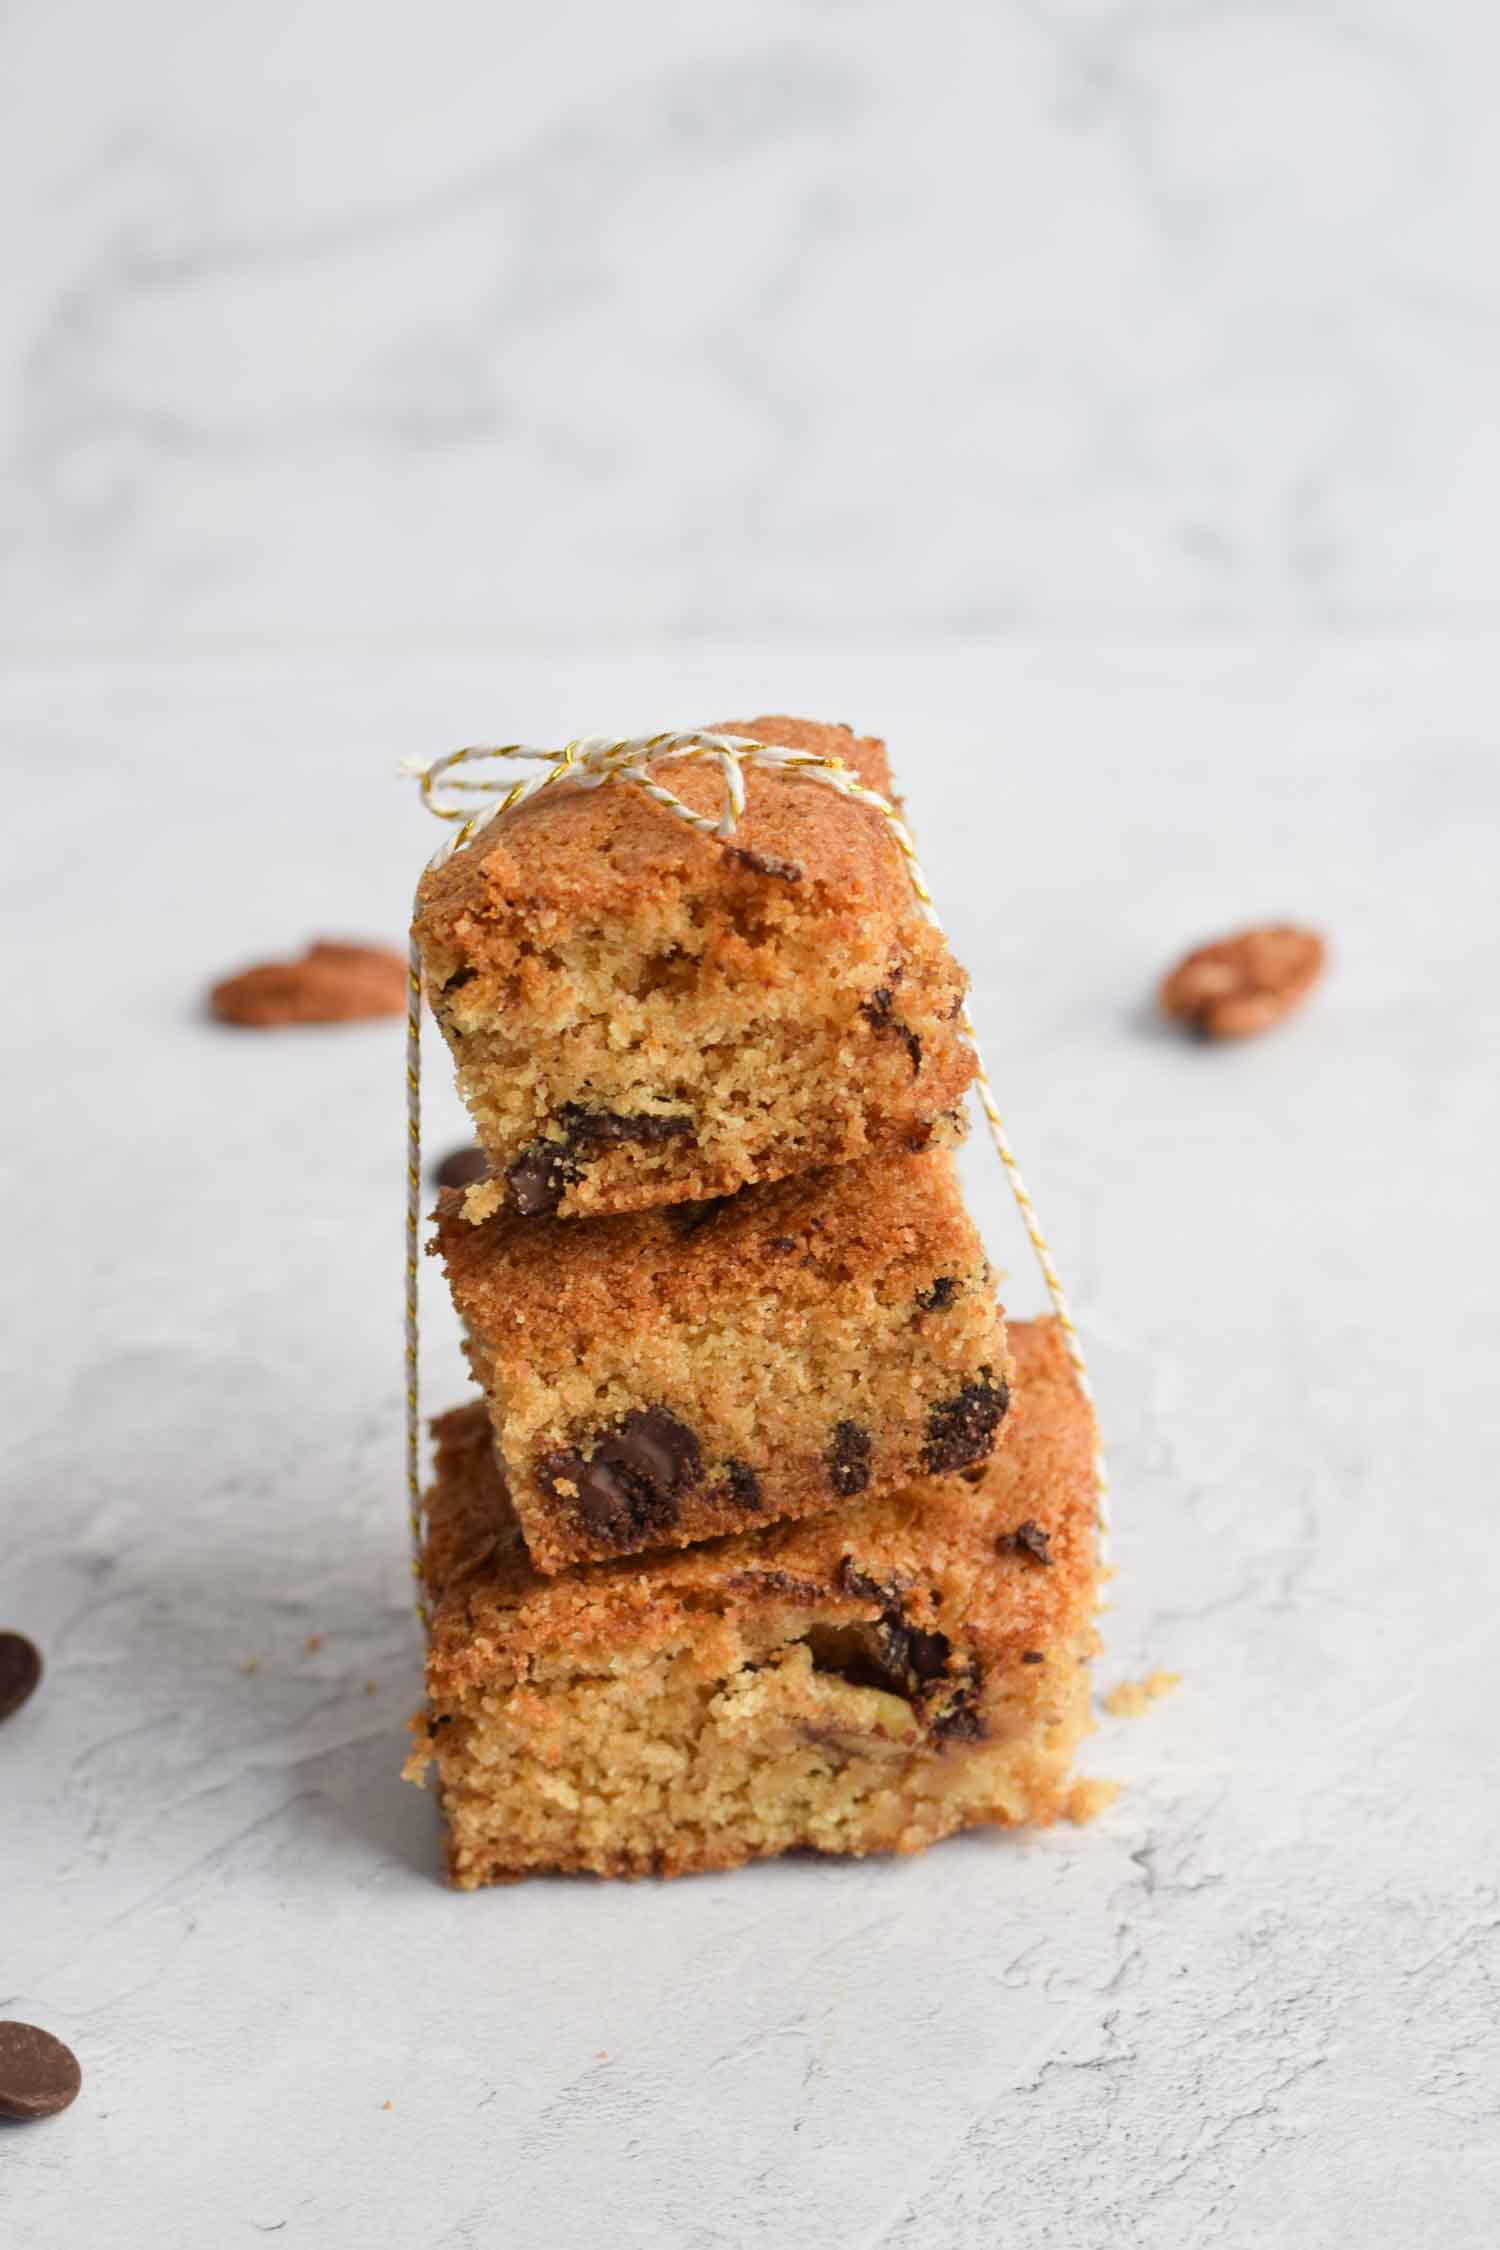 A stack with three low FODMAP blondies